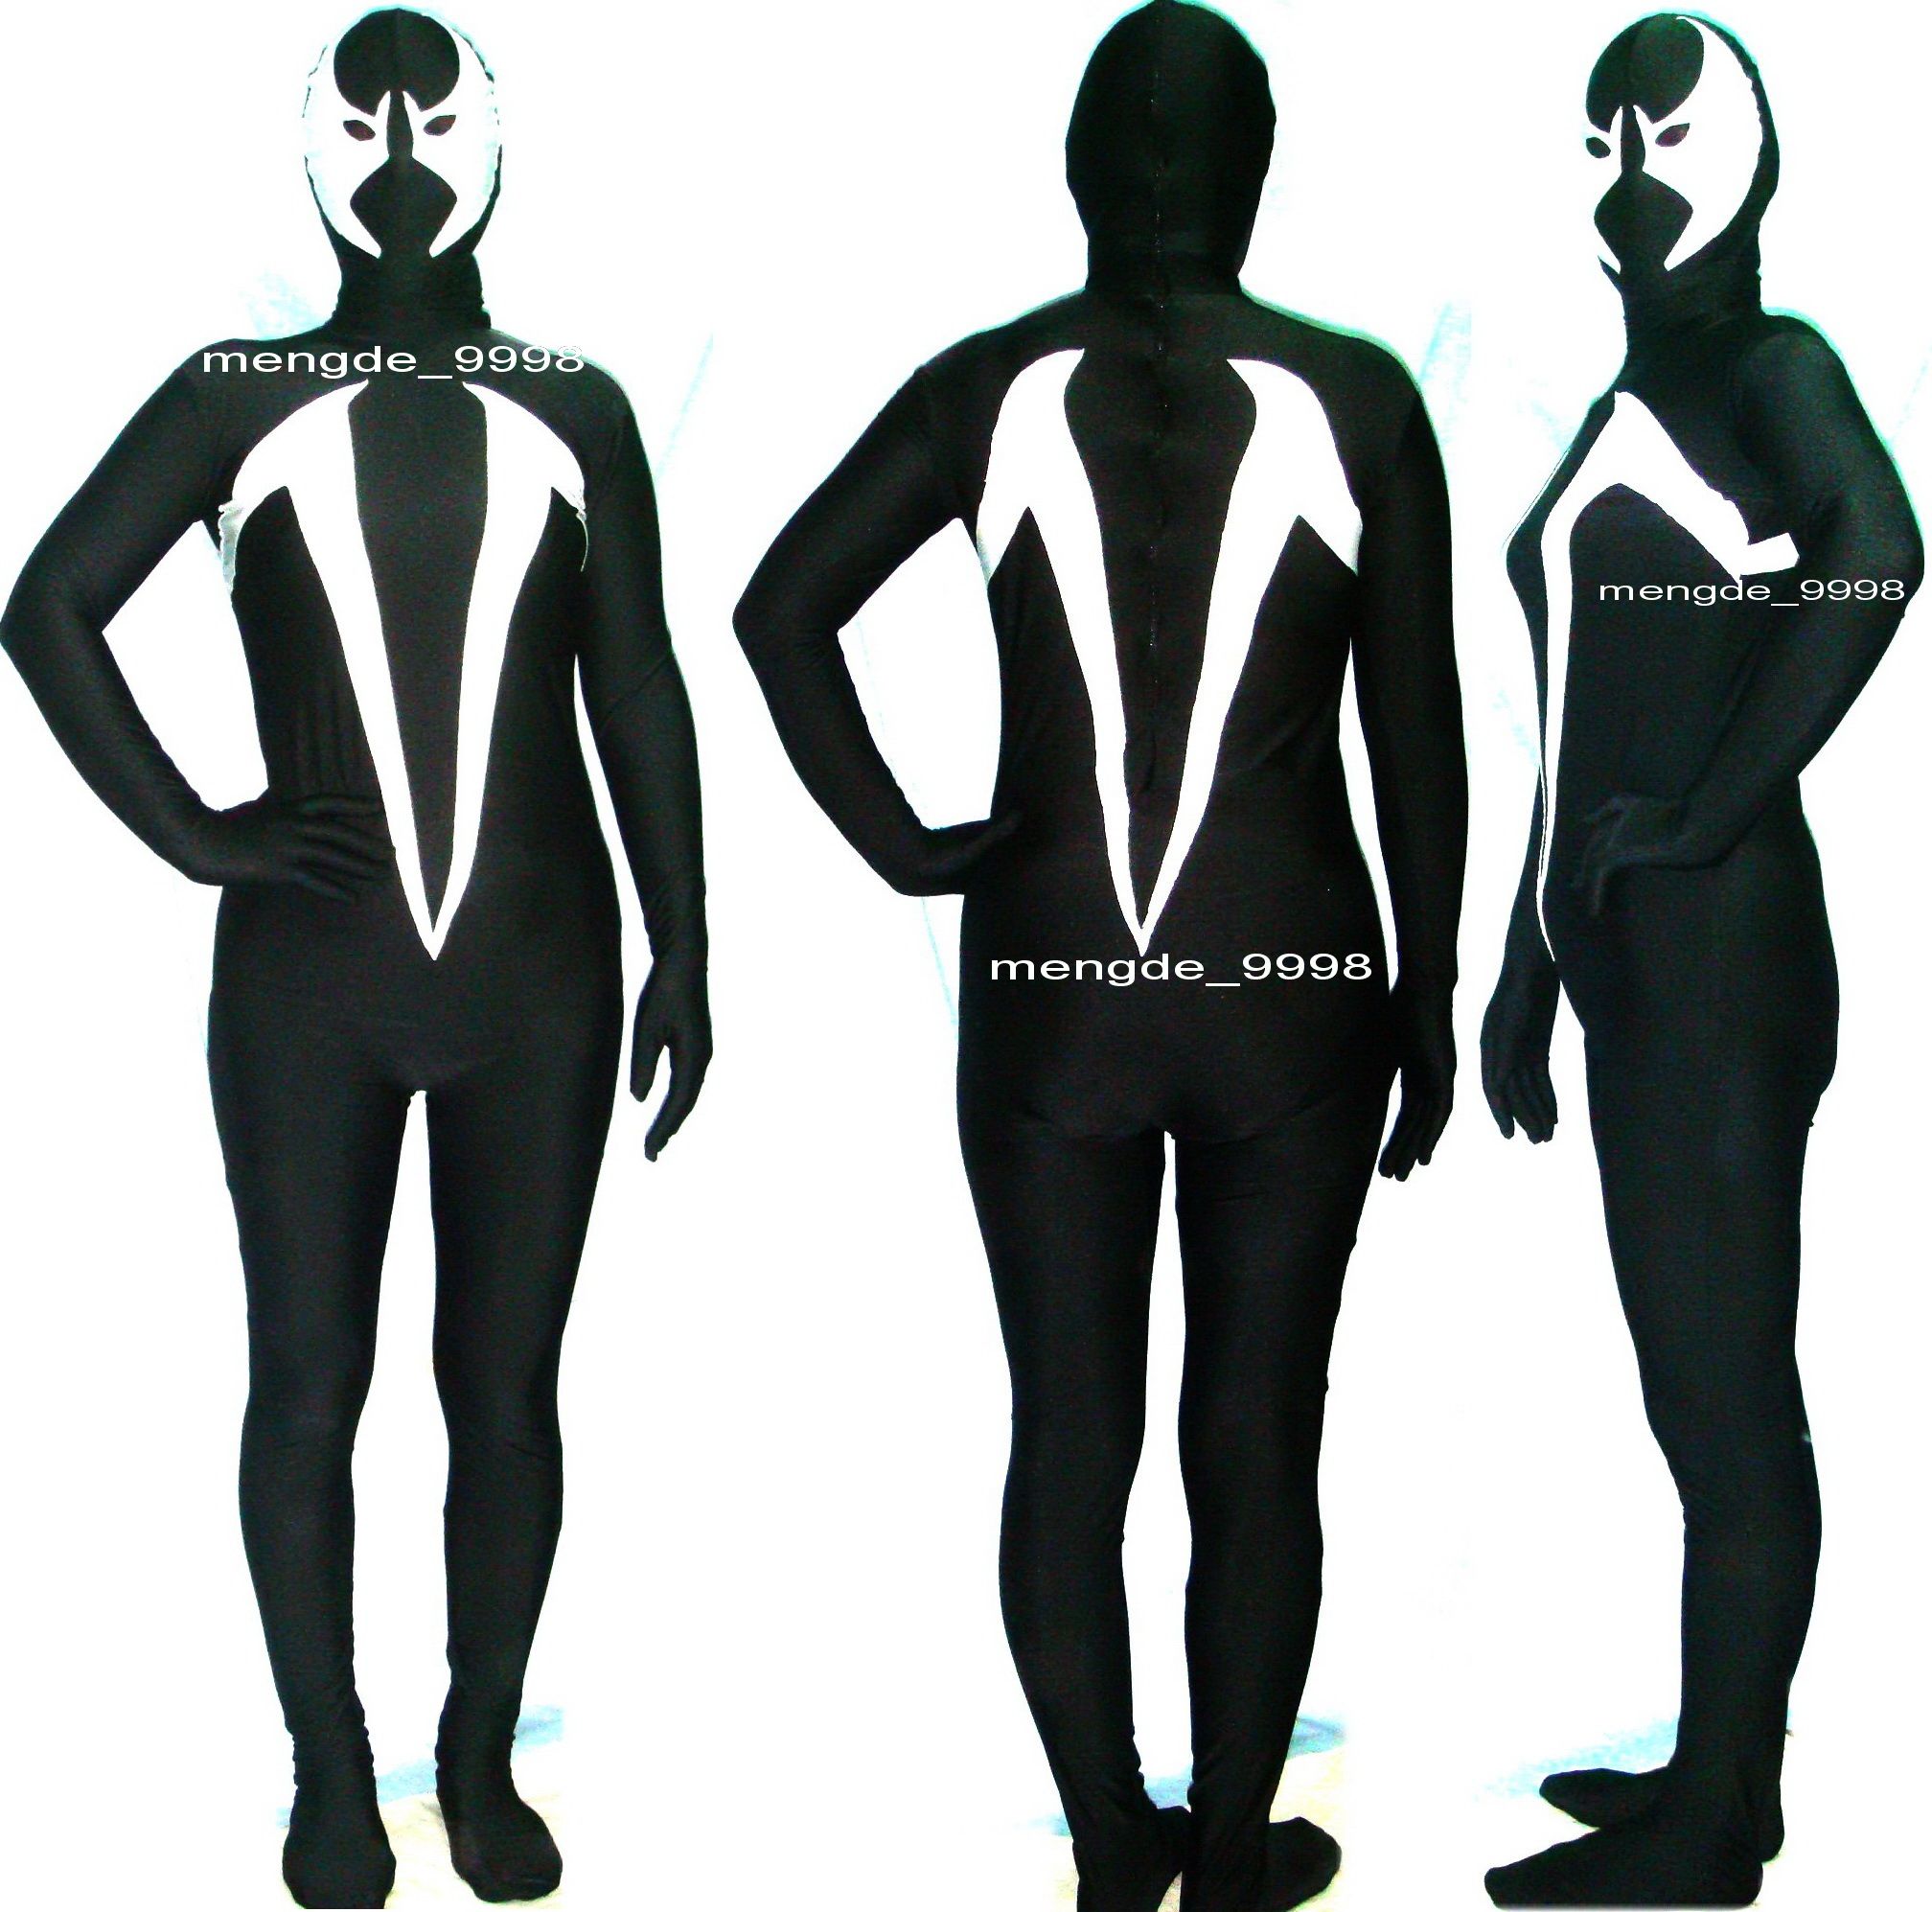 Full Body Suit Lycra Spandex Costume Suit for Halloween Cosplay Costumes Fancy Dress Black 